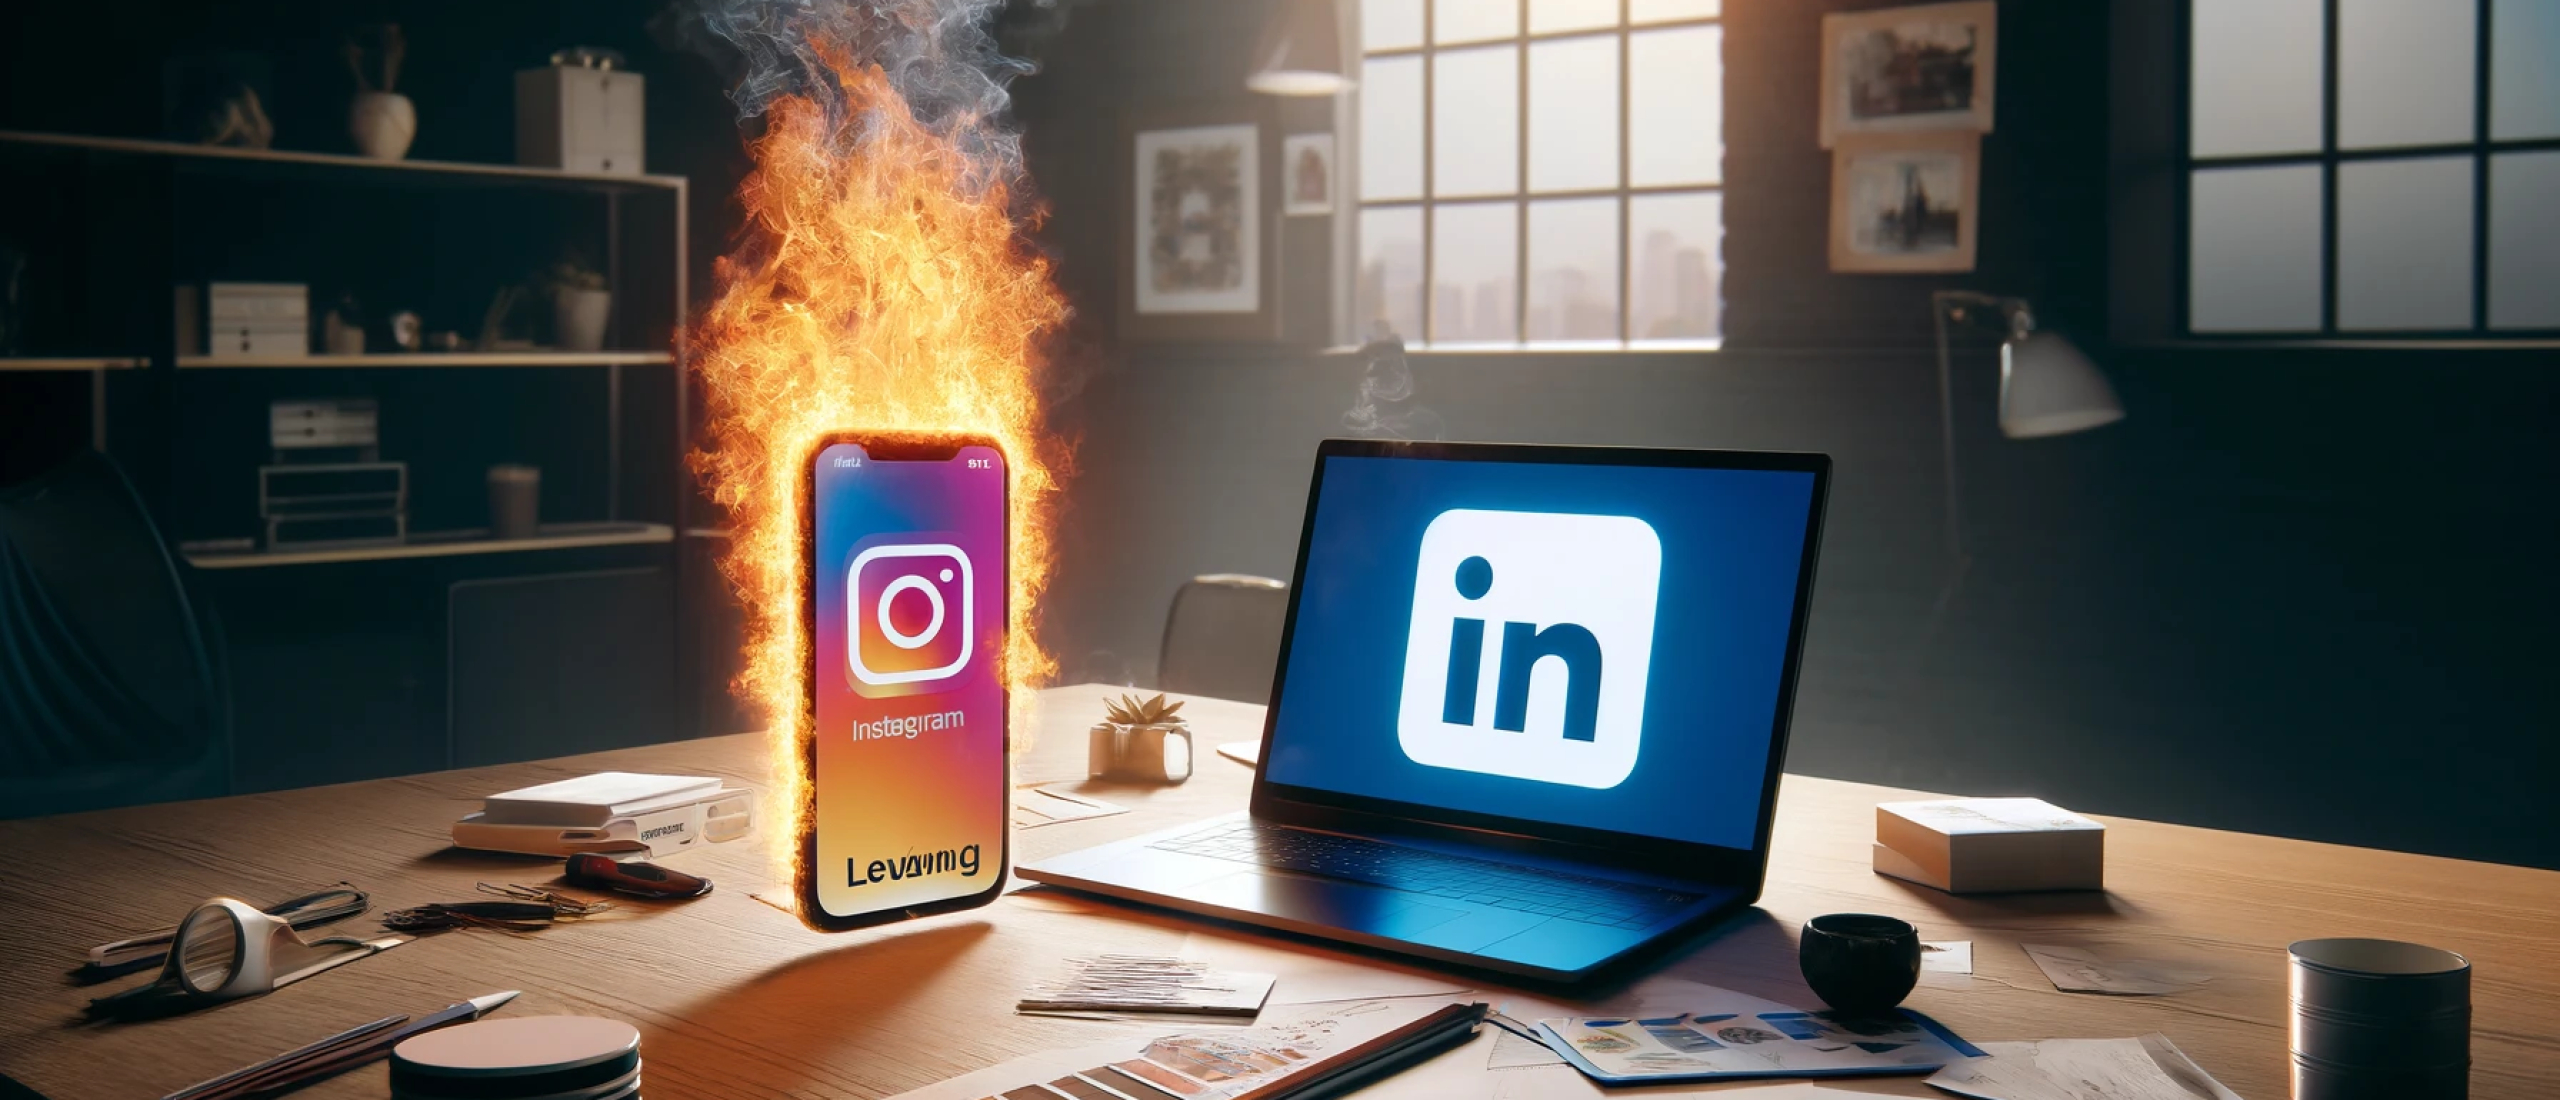 10 Reasons to Ditch Instagram and Get Active on LinkedIn as an Interior Designer